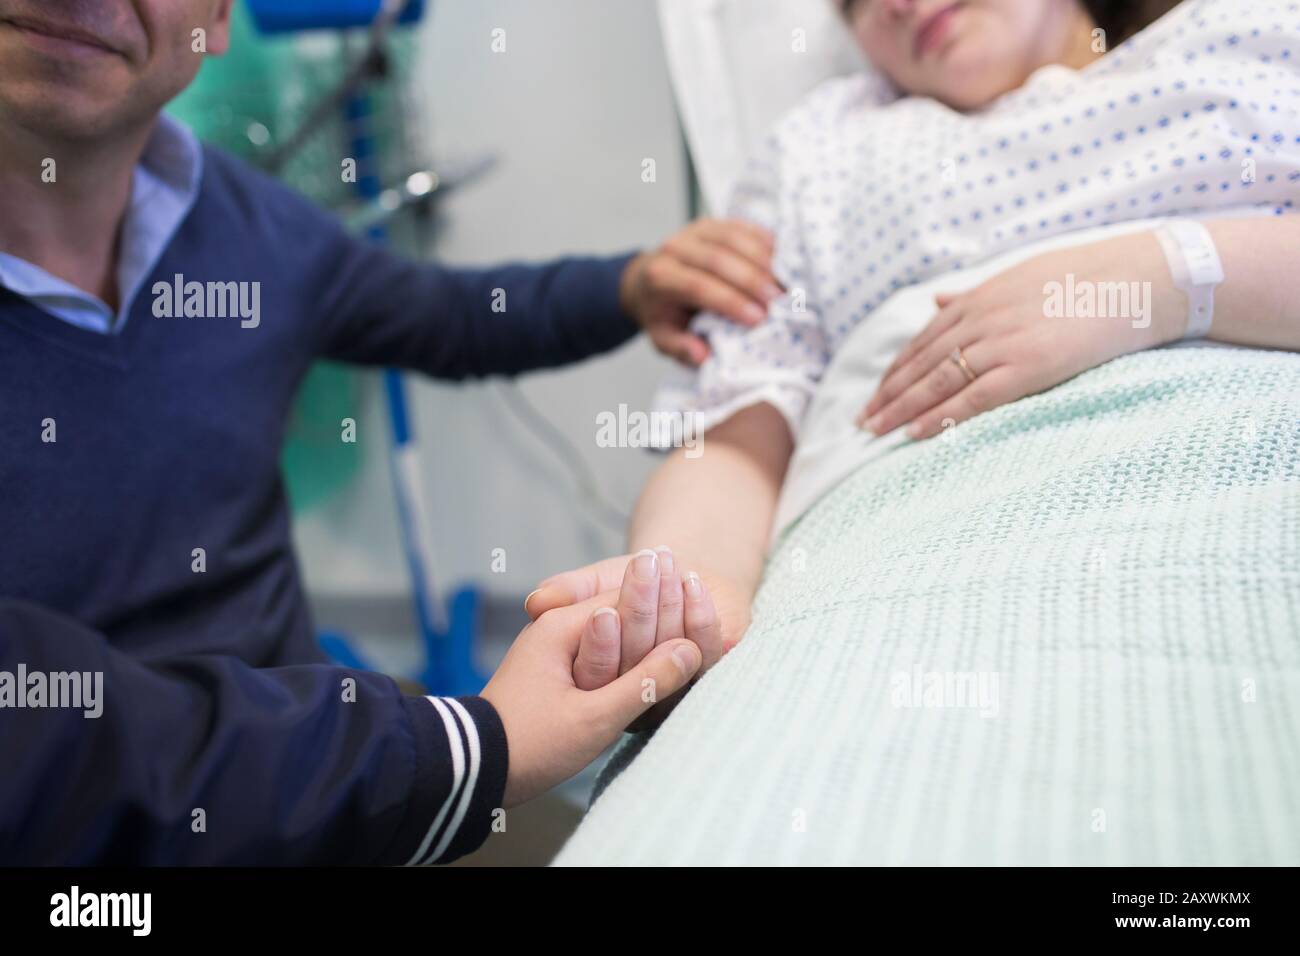 Affectionate son holding hands with mother resting in hospital bed Stock Photo